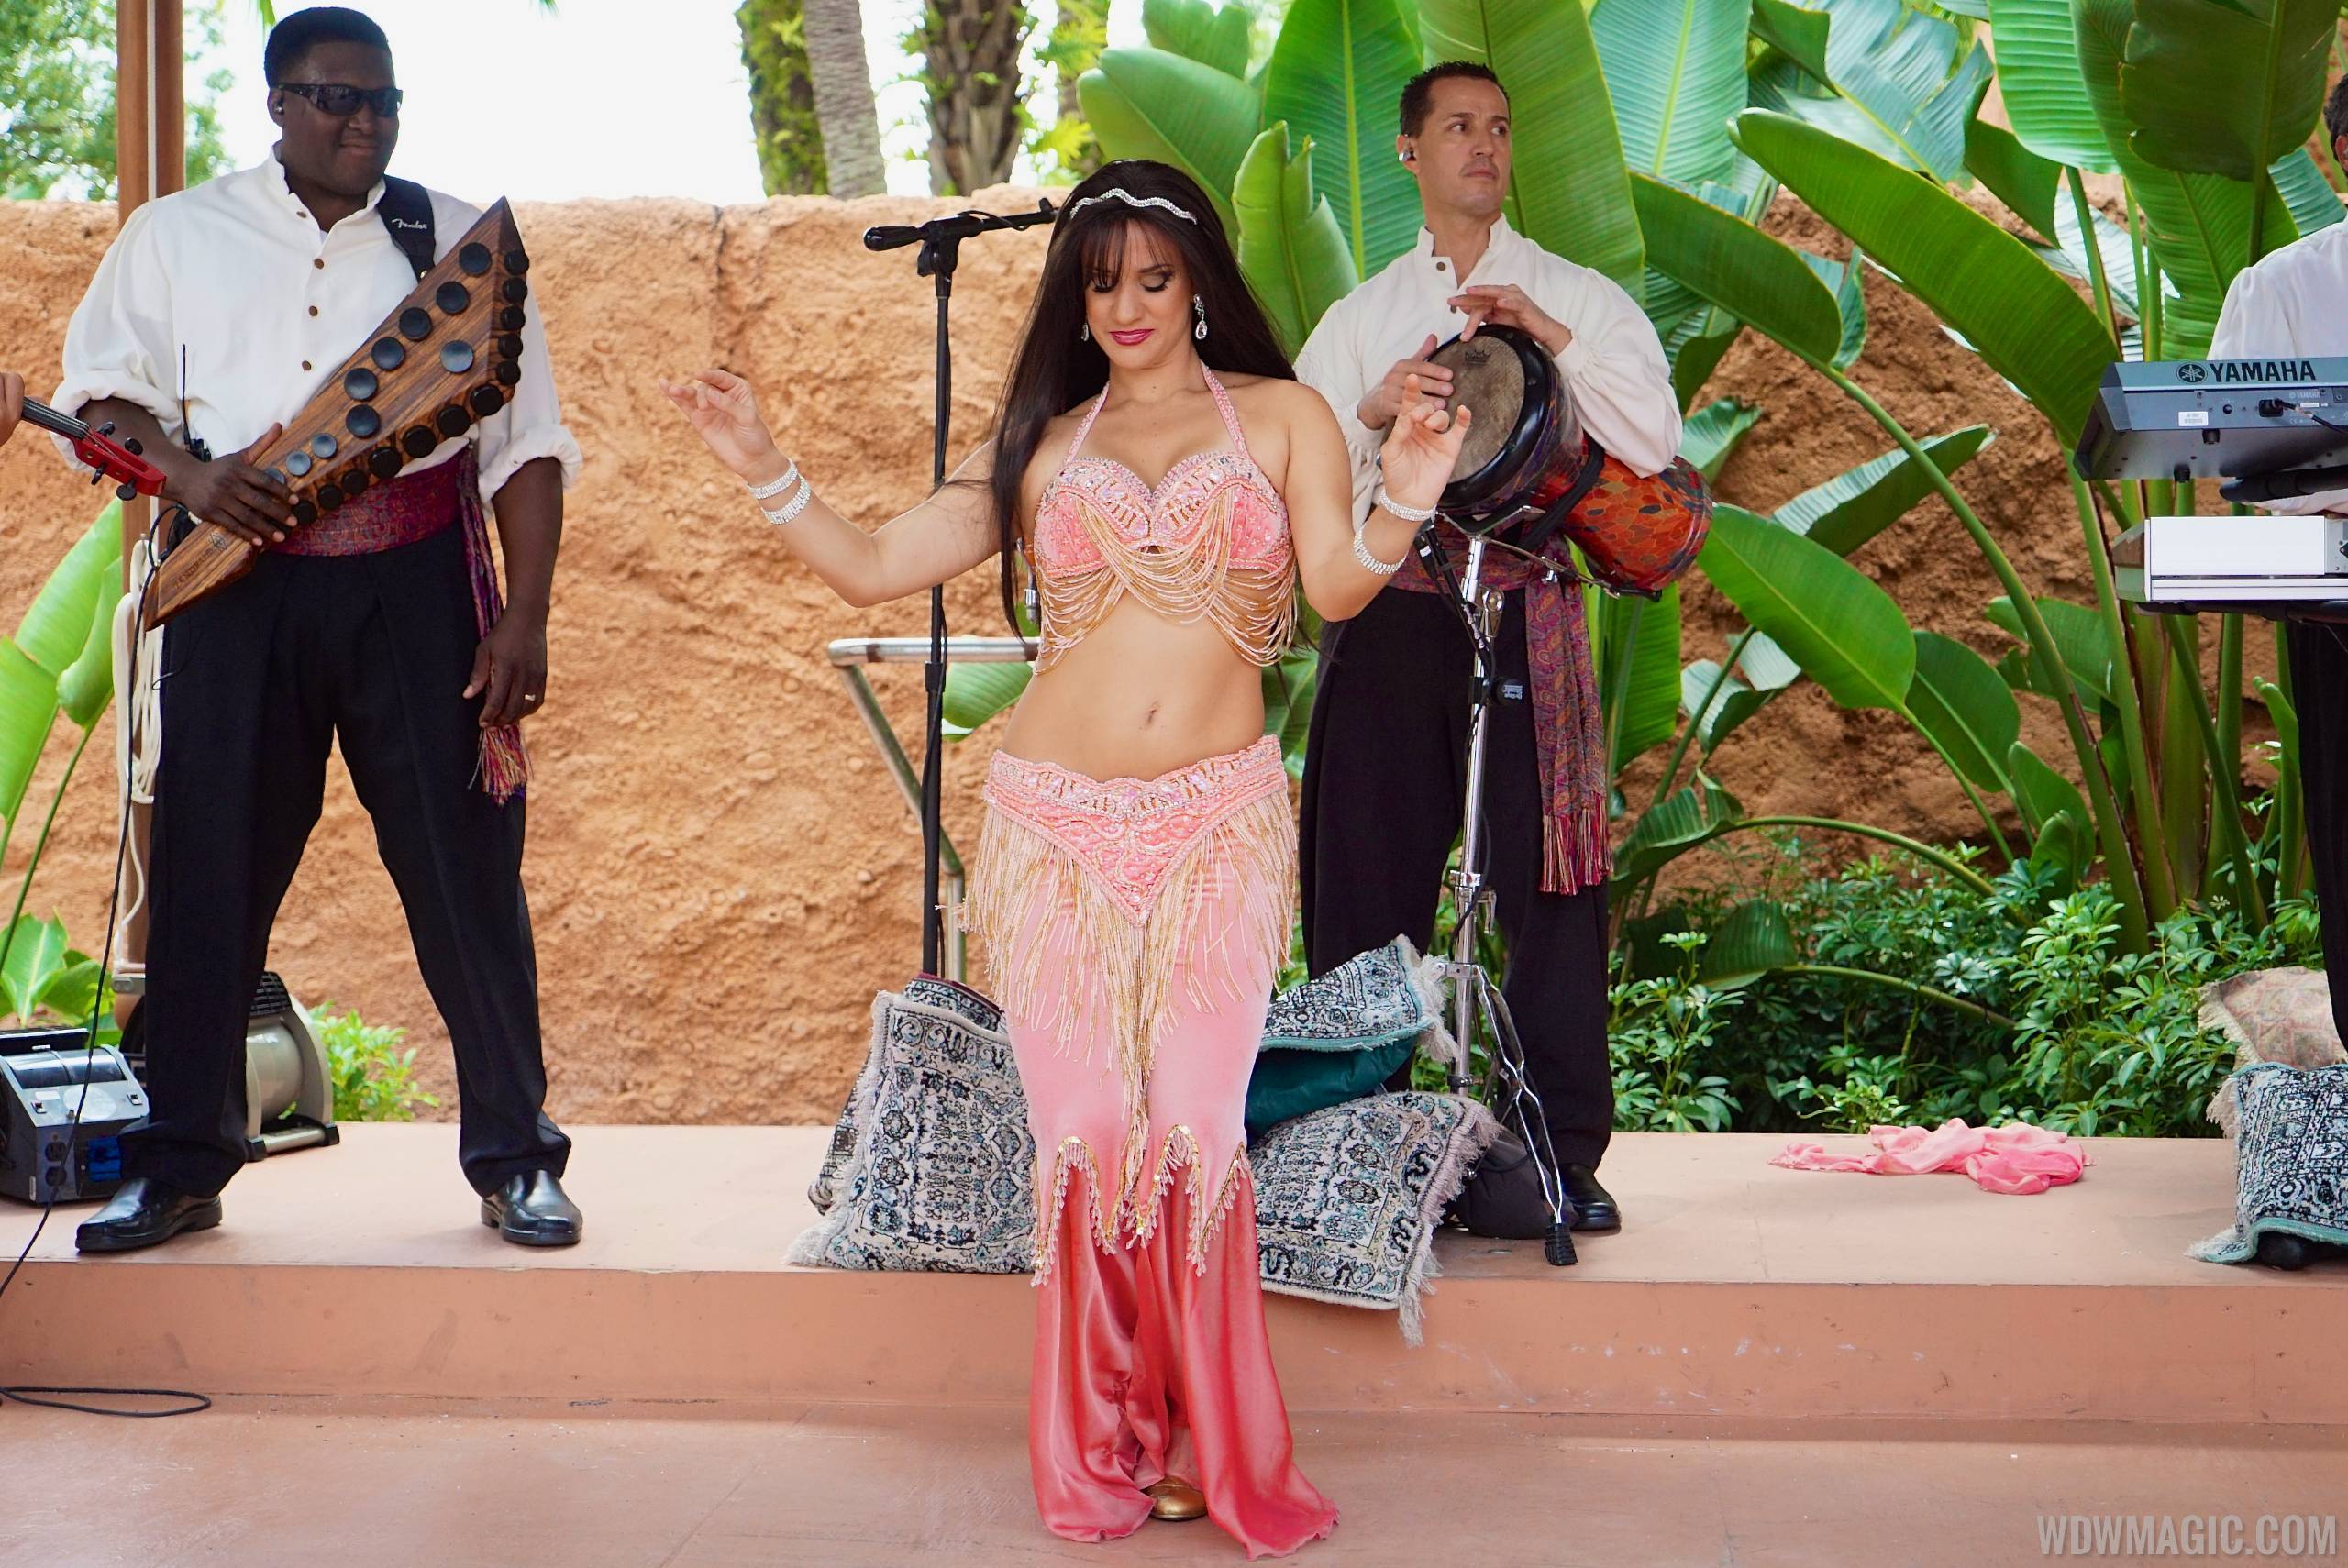 Great music and belly dancer